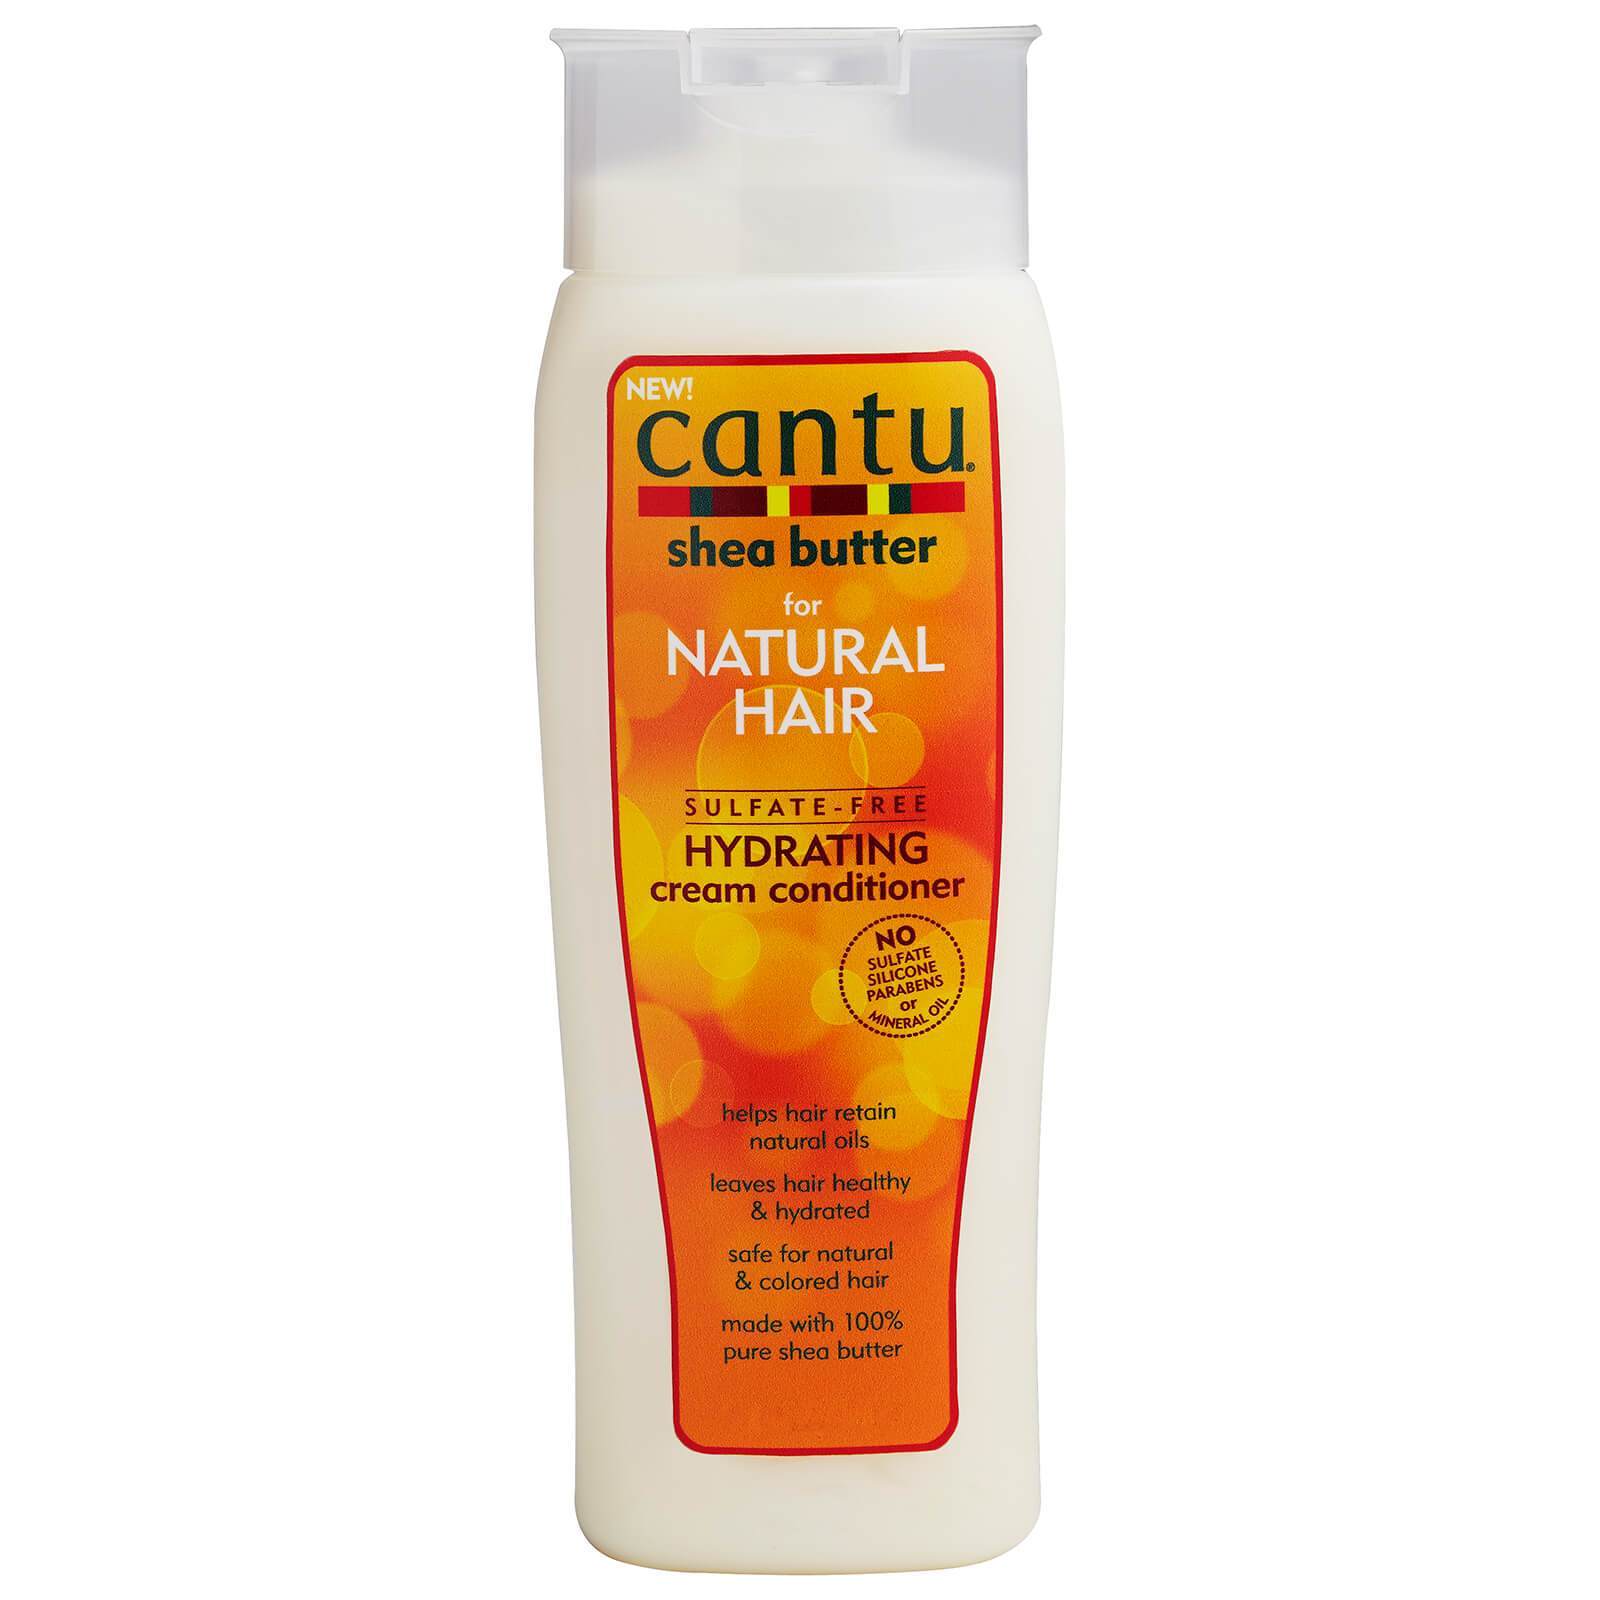 Cantu Natural Hair Sulfate-Free Hydrating Cream Conditioner 400ml